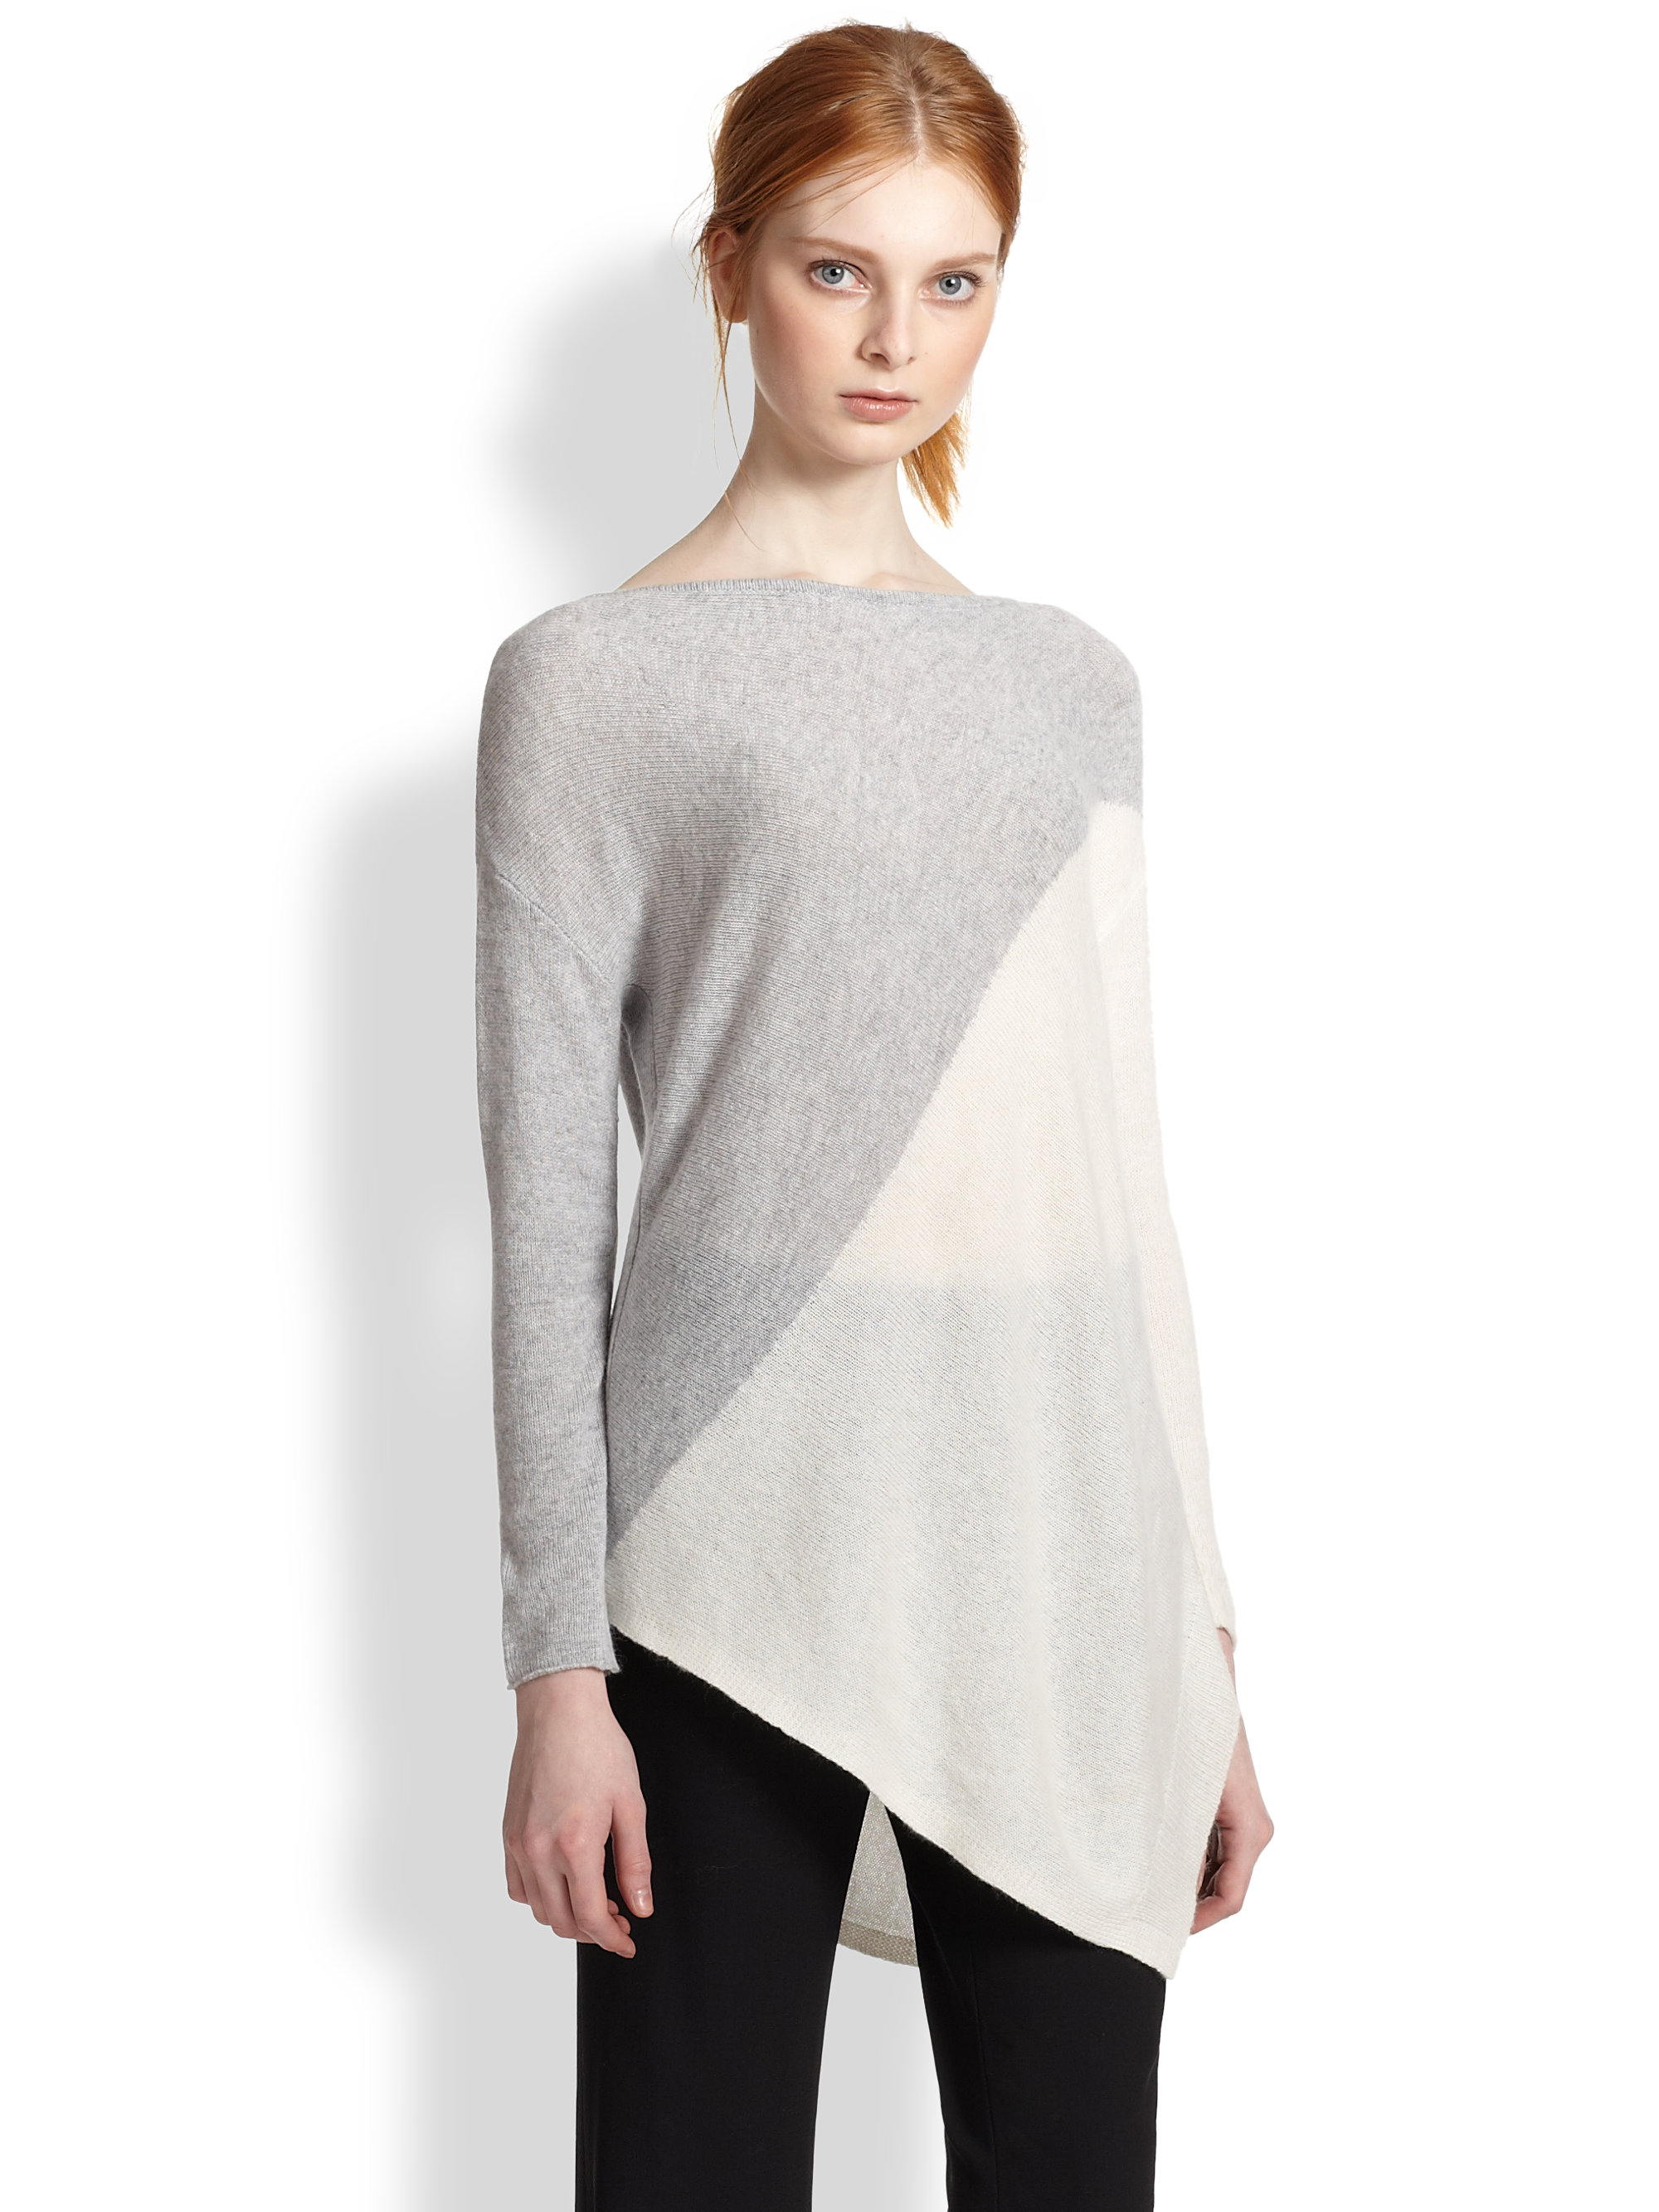 Lyst - Alice + Olivia Asymmetrical Colorblock Pullover Sweater in Gray